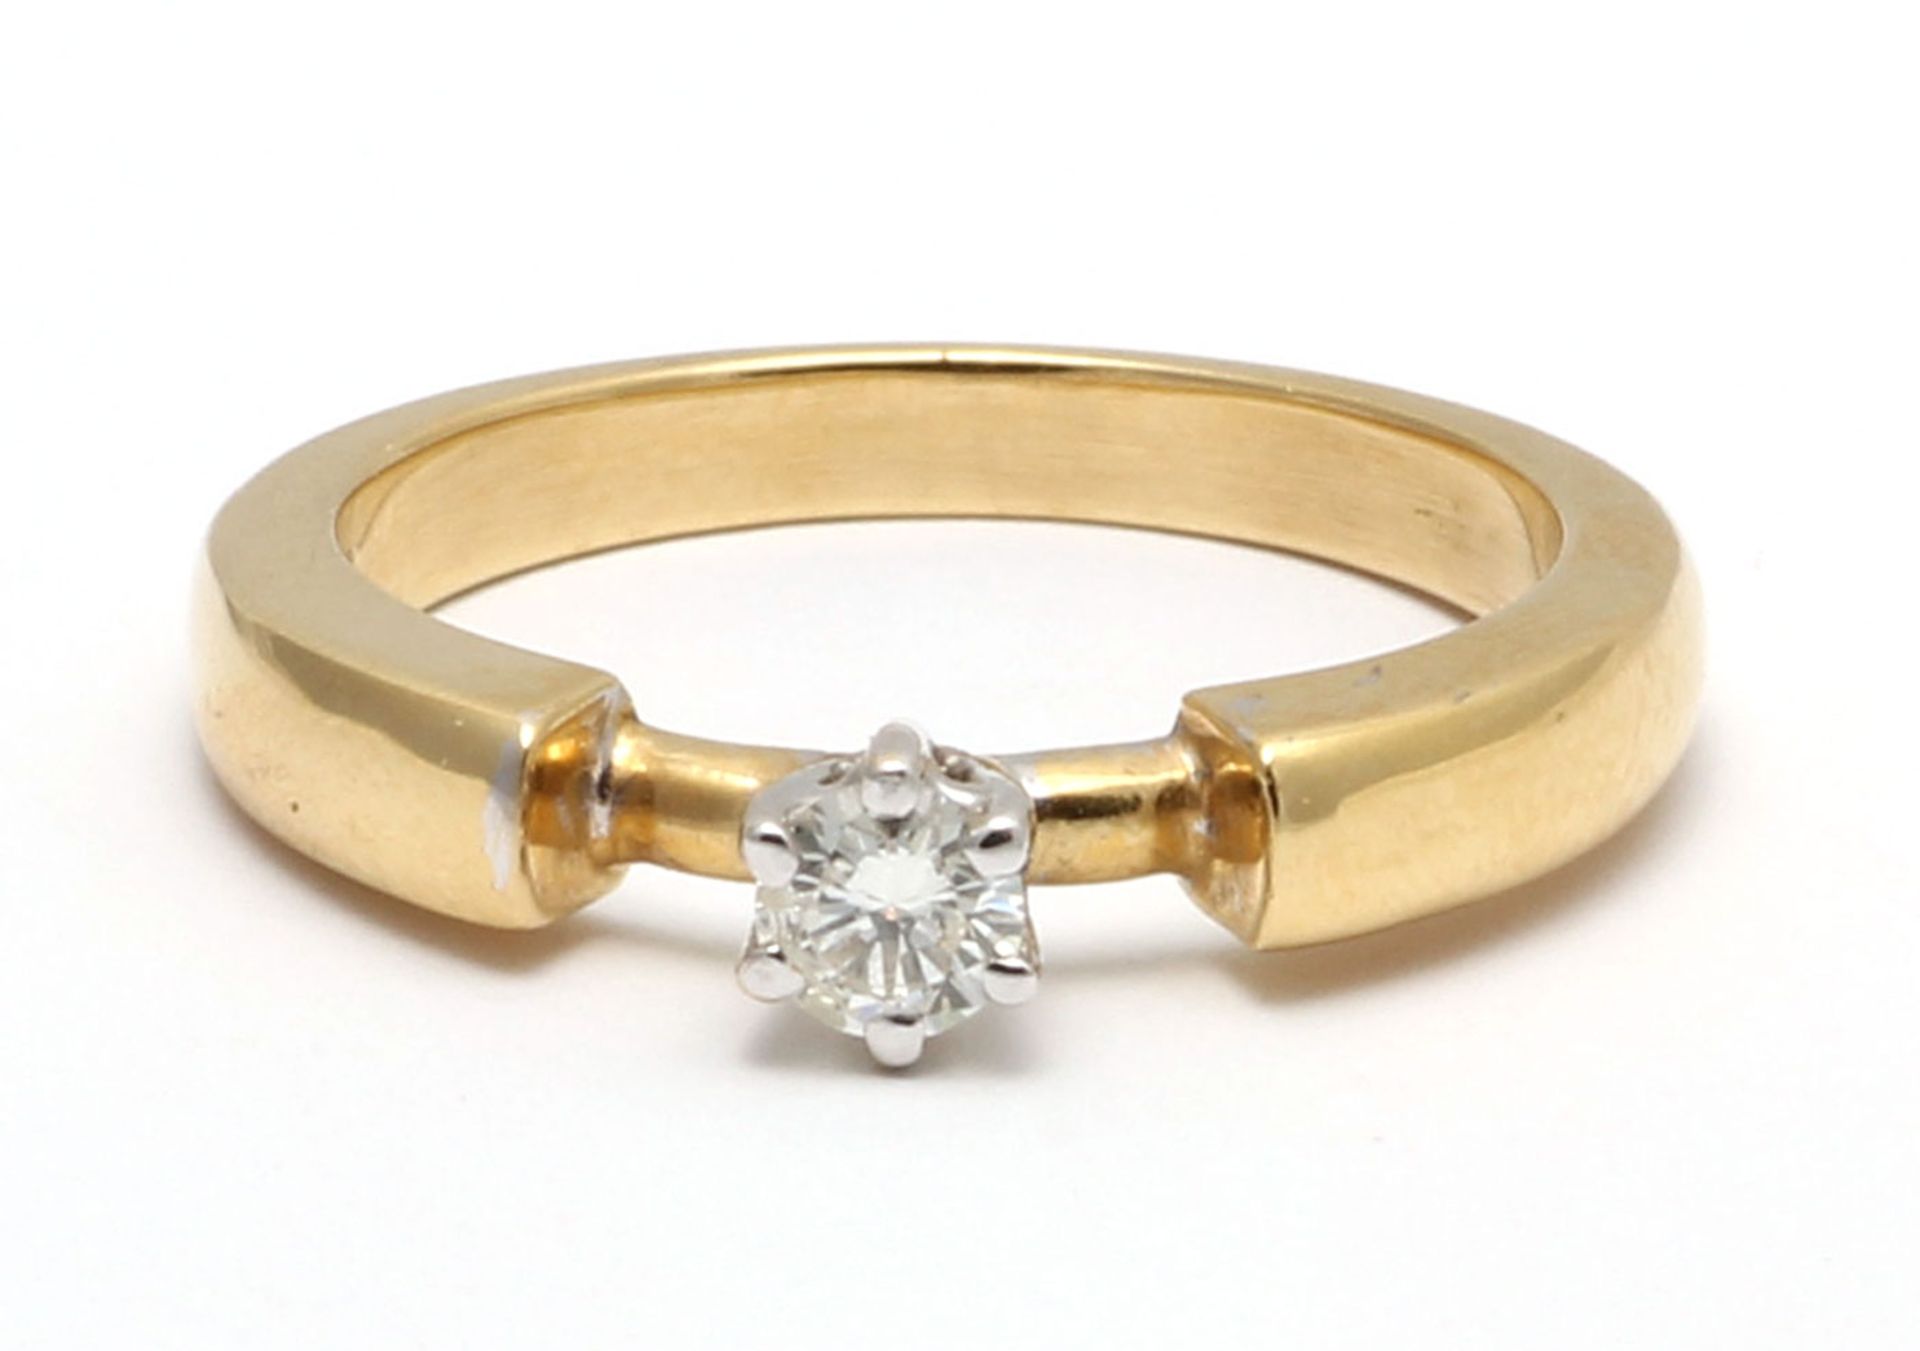 18ct Single Stone Fancy Claw Set Diamond Ring 0.20 Carats - Valued By GIE £3,790.00 - A beautiful - Image 5 of 9